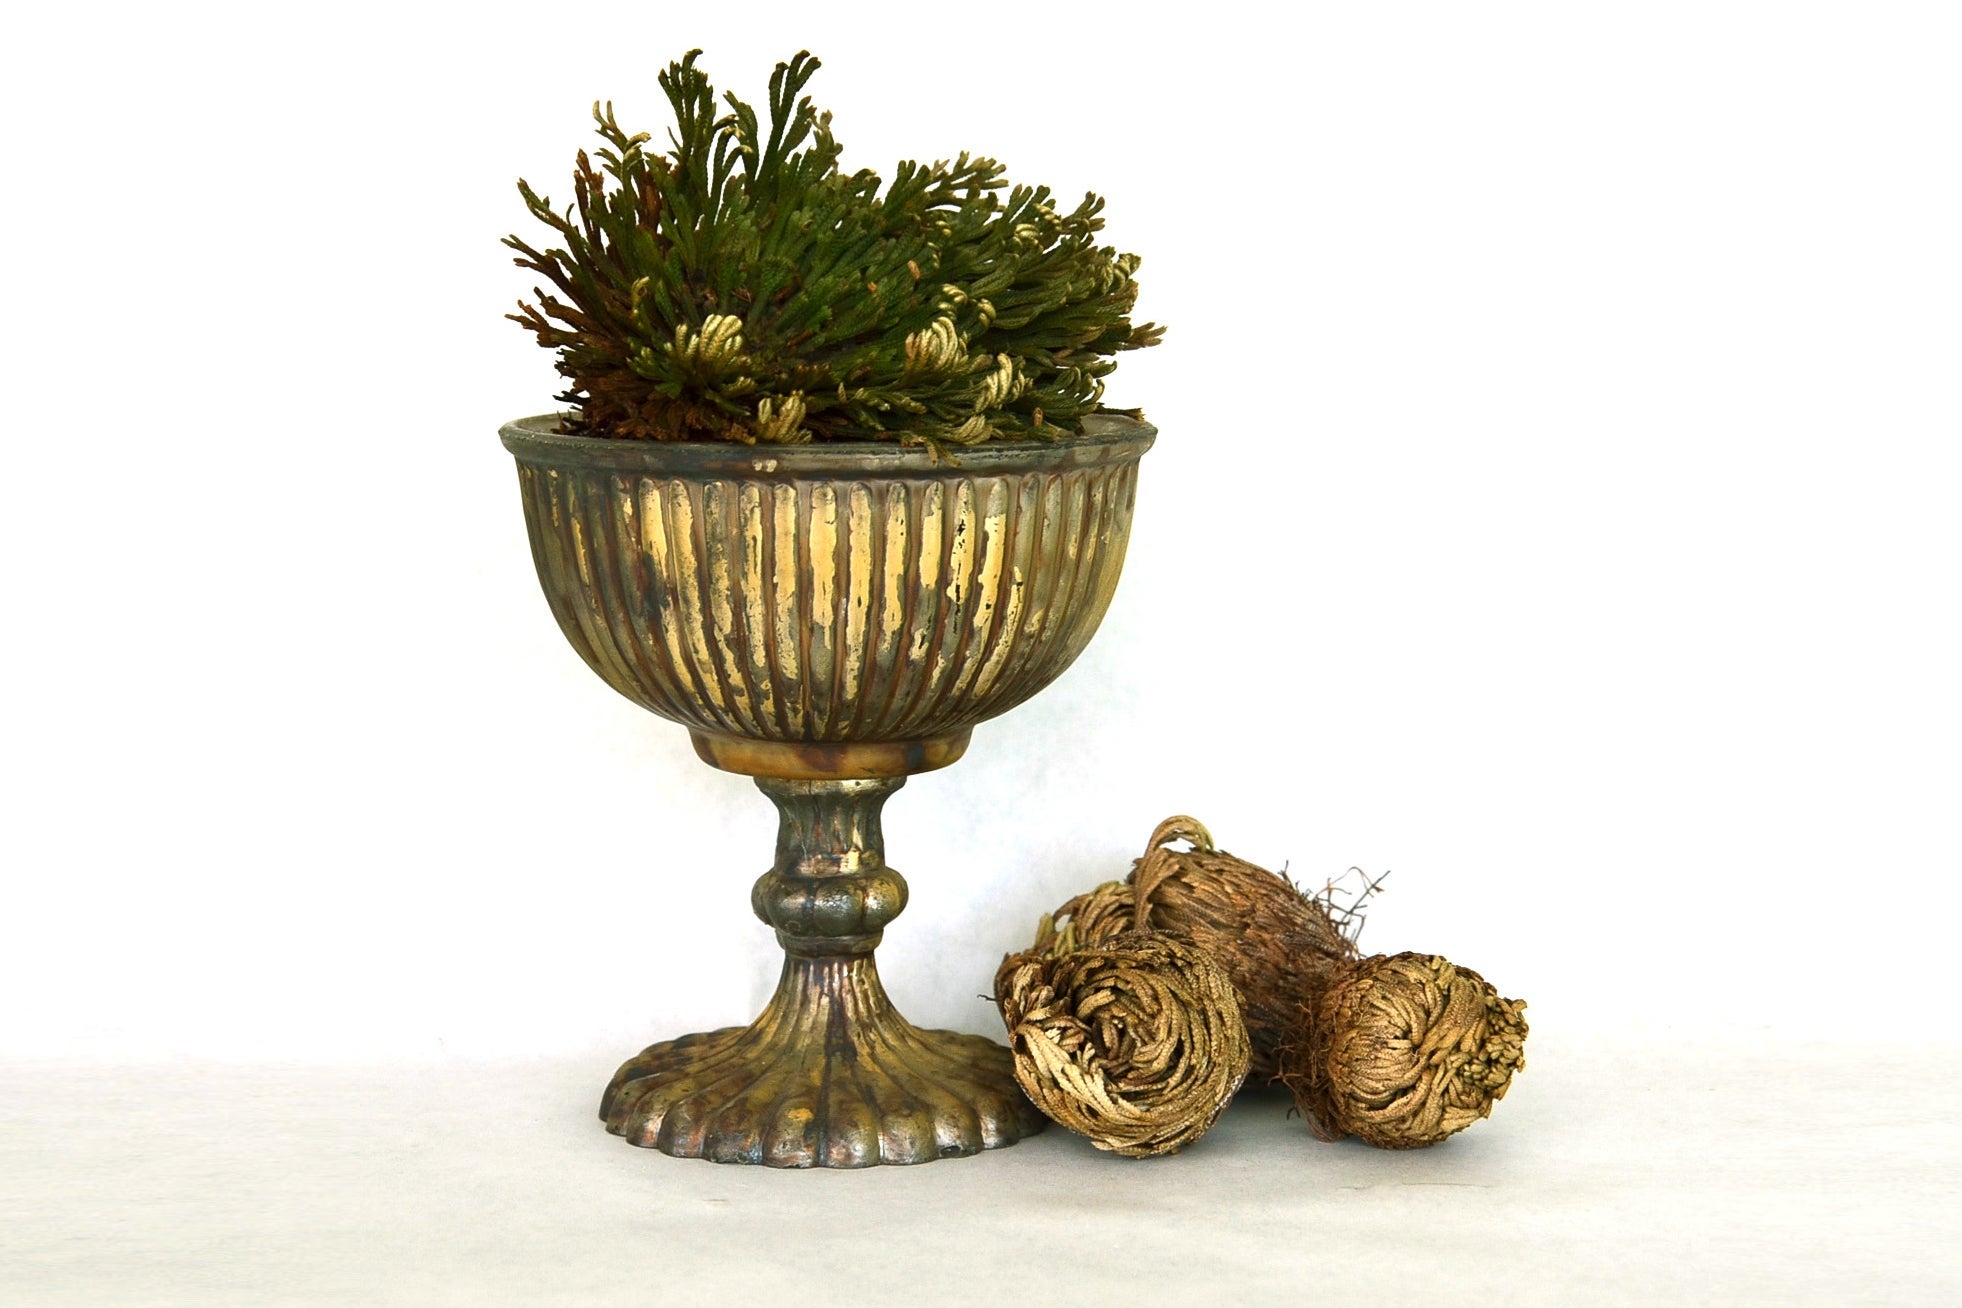 Flowers & Weeds Rose of Jericho